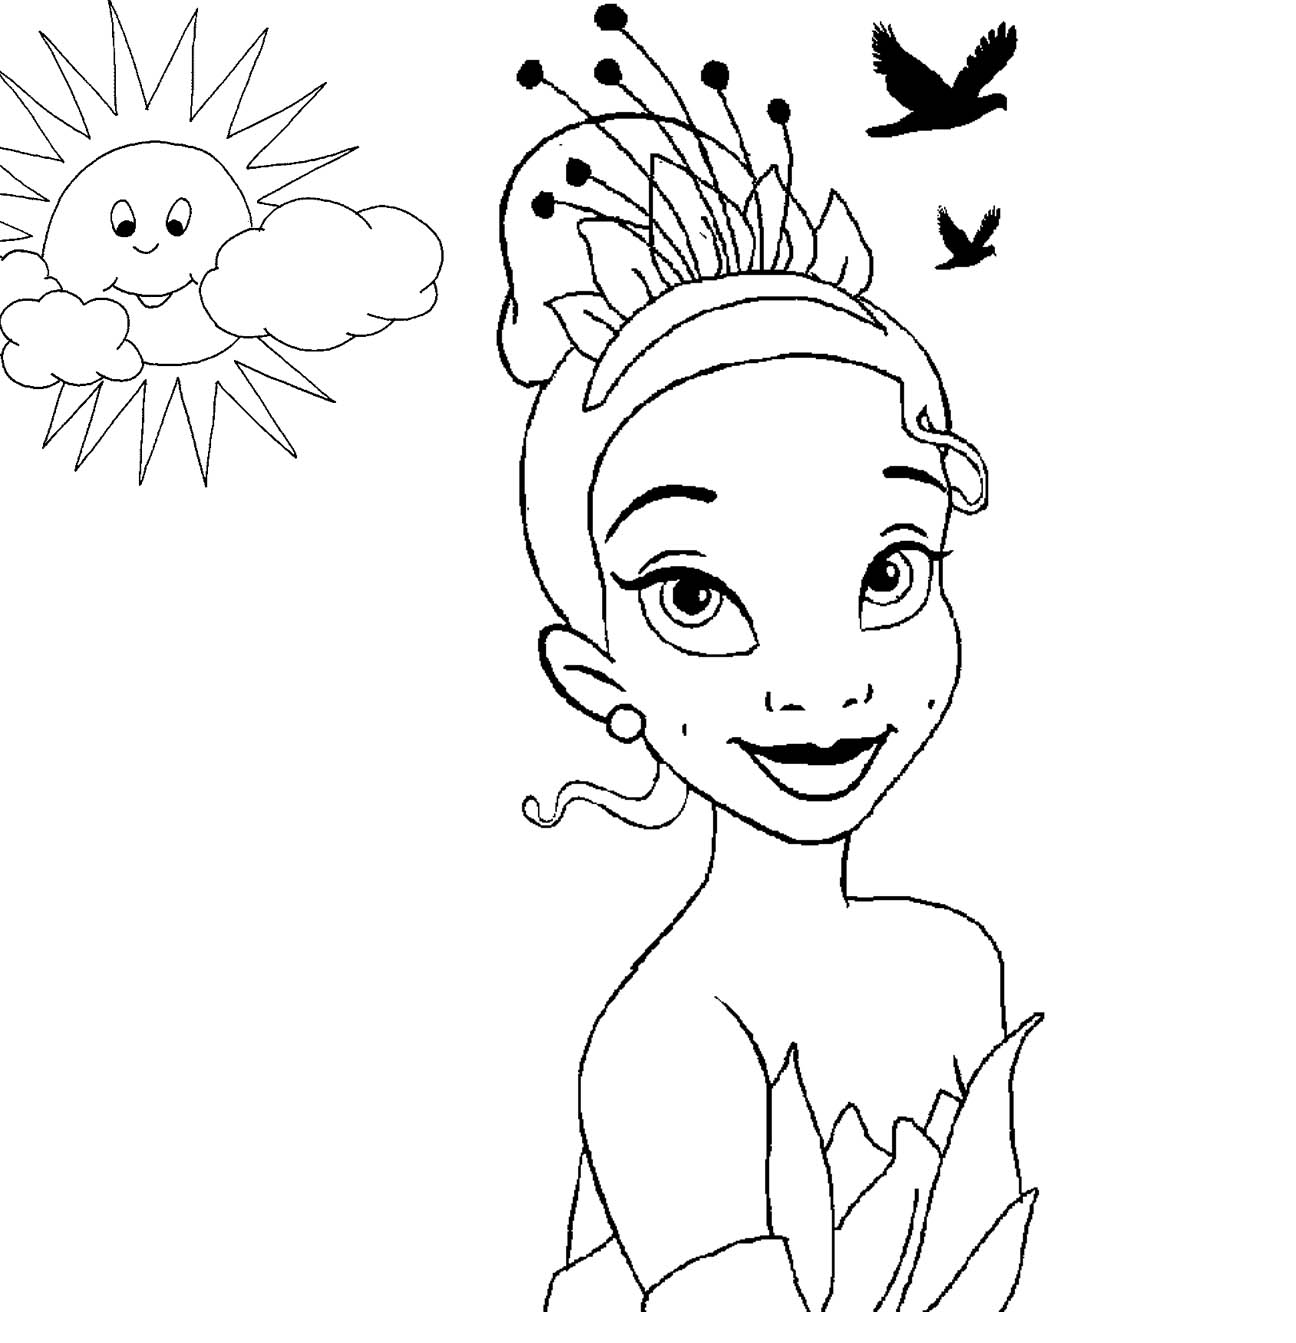 Coloring pages disney princess tiana coloring pages to girls all for